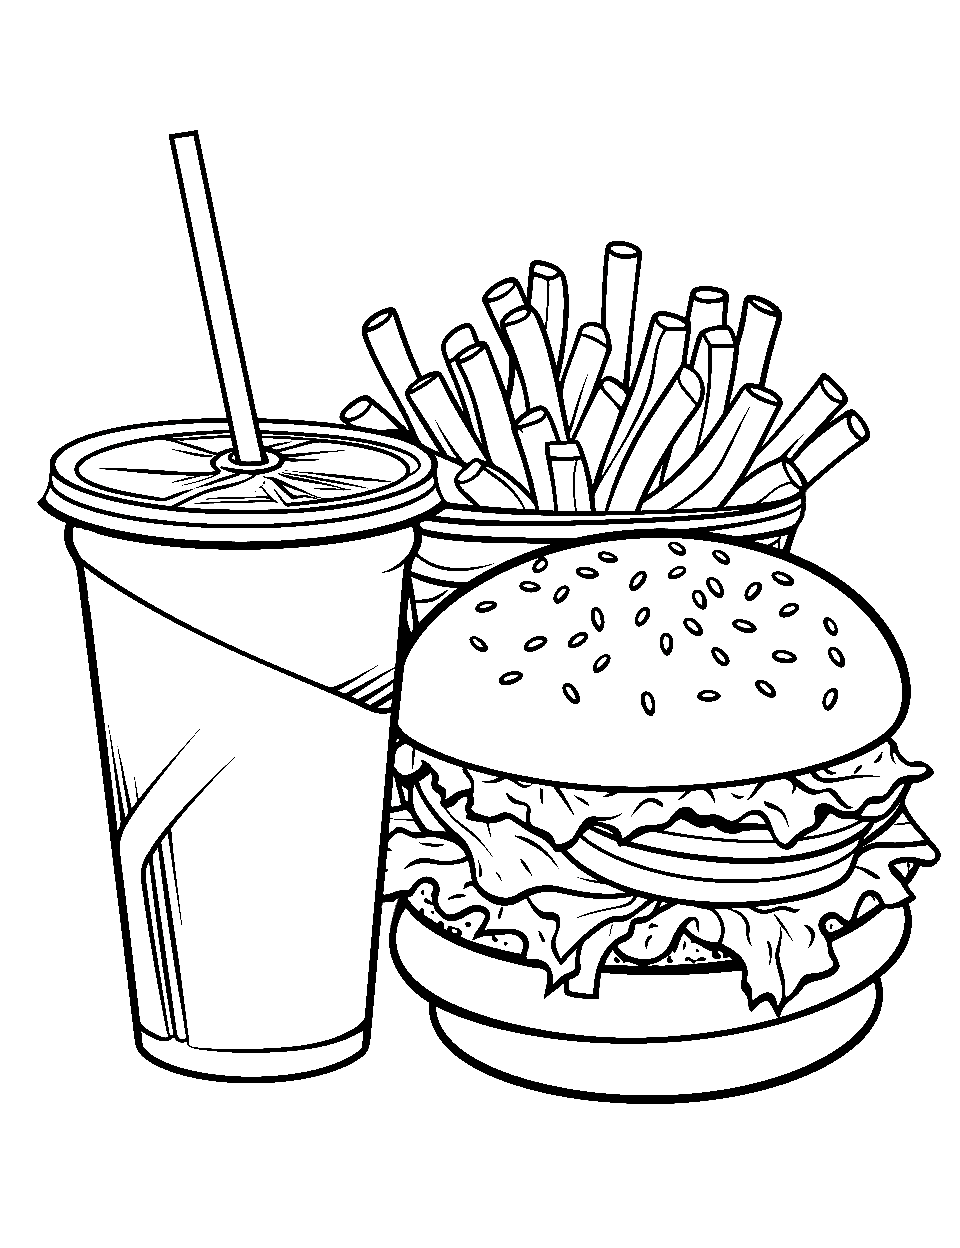 Burger and Fries Art Food Coloring Page - A burger with fries and a drink on the side.